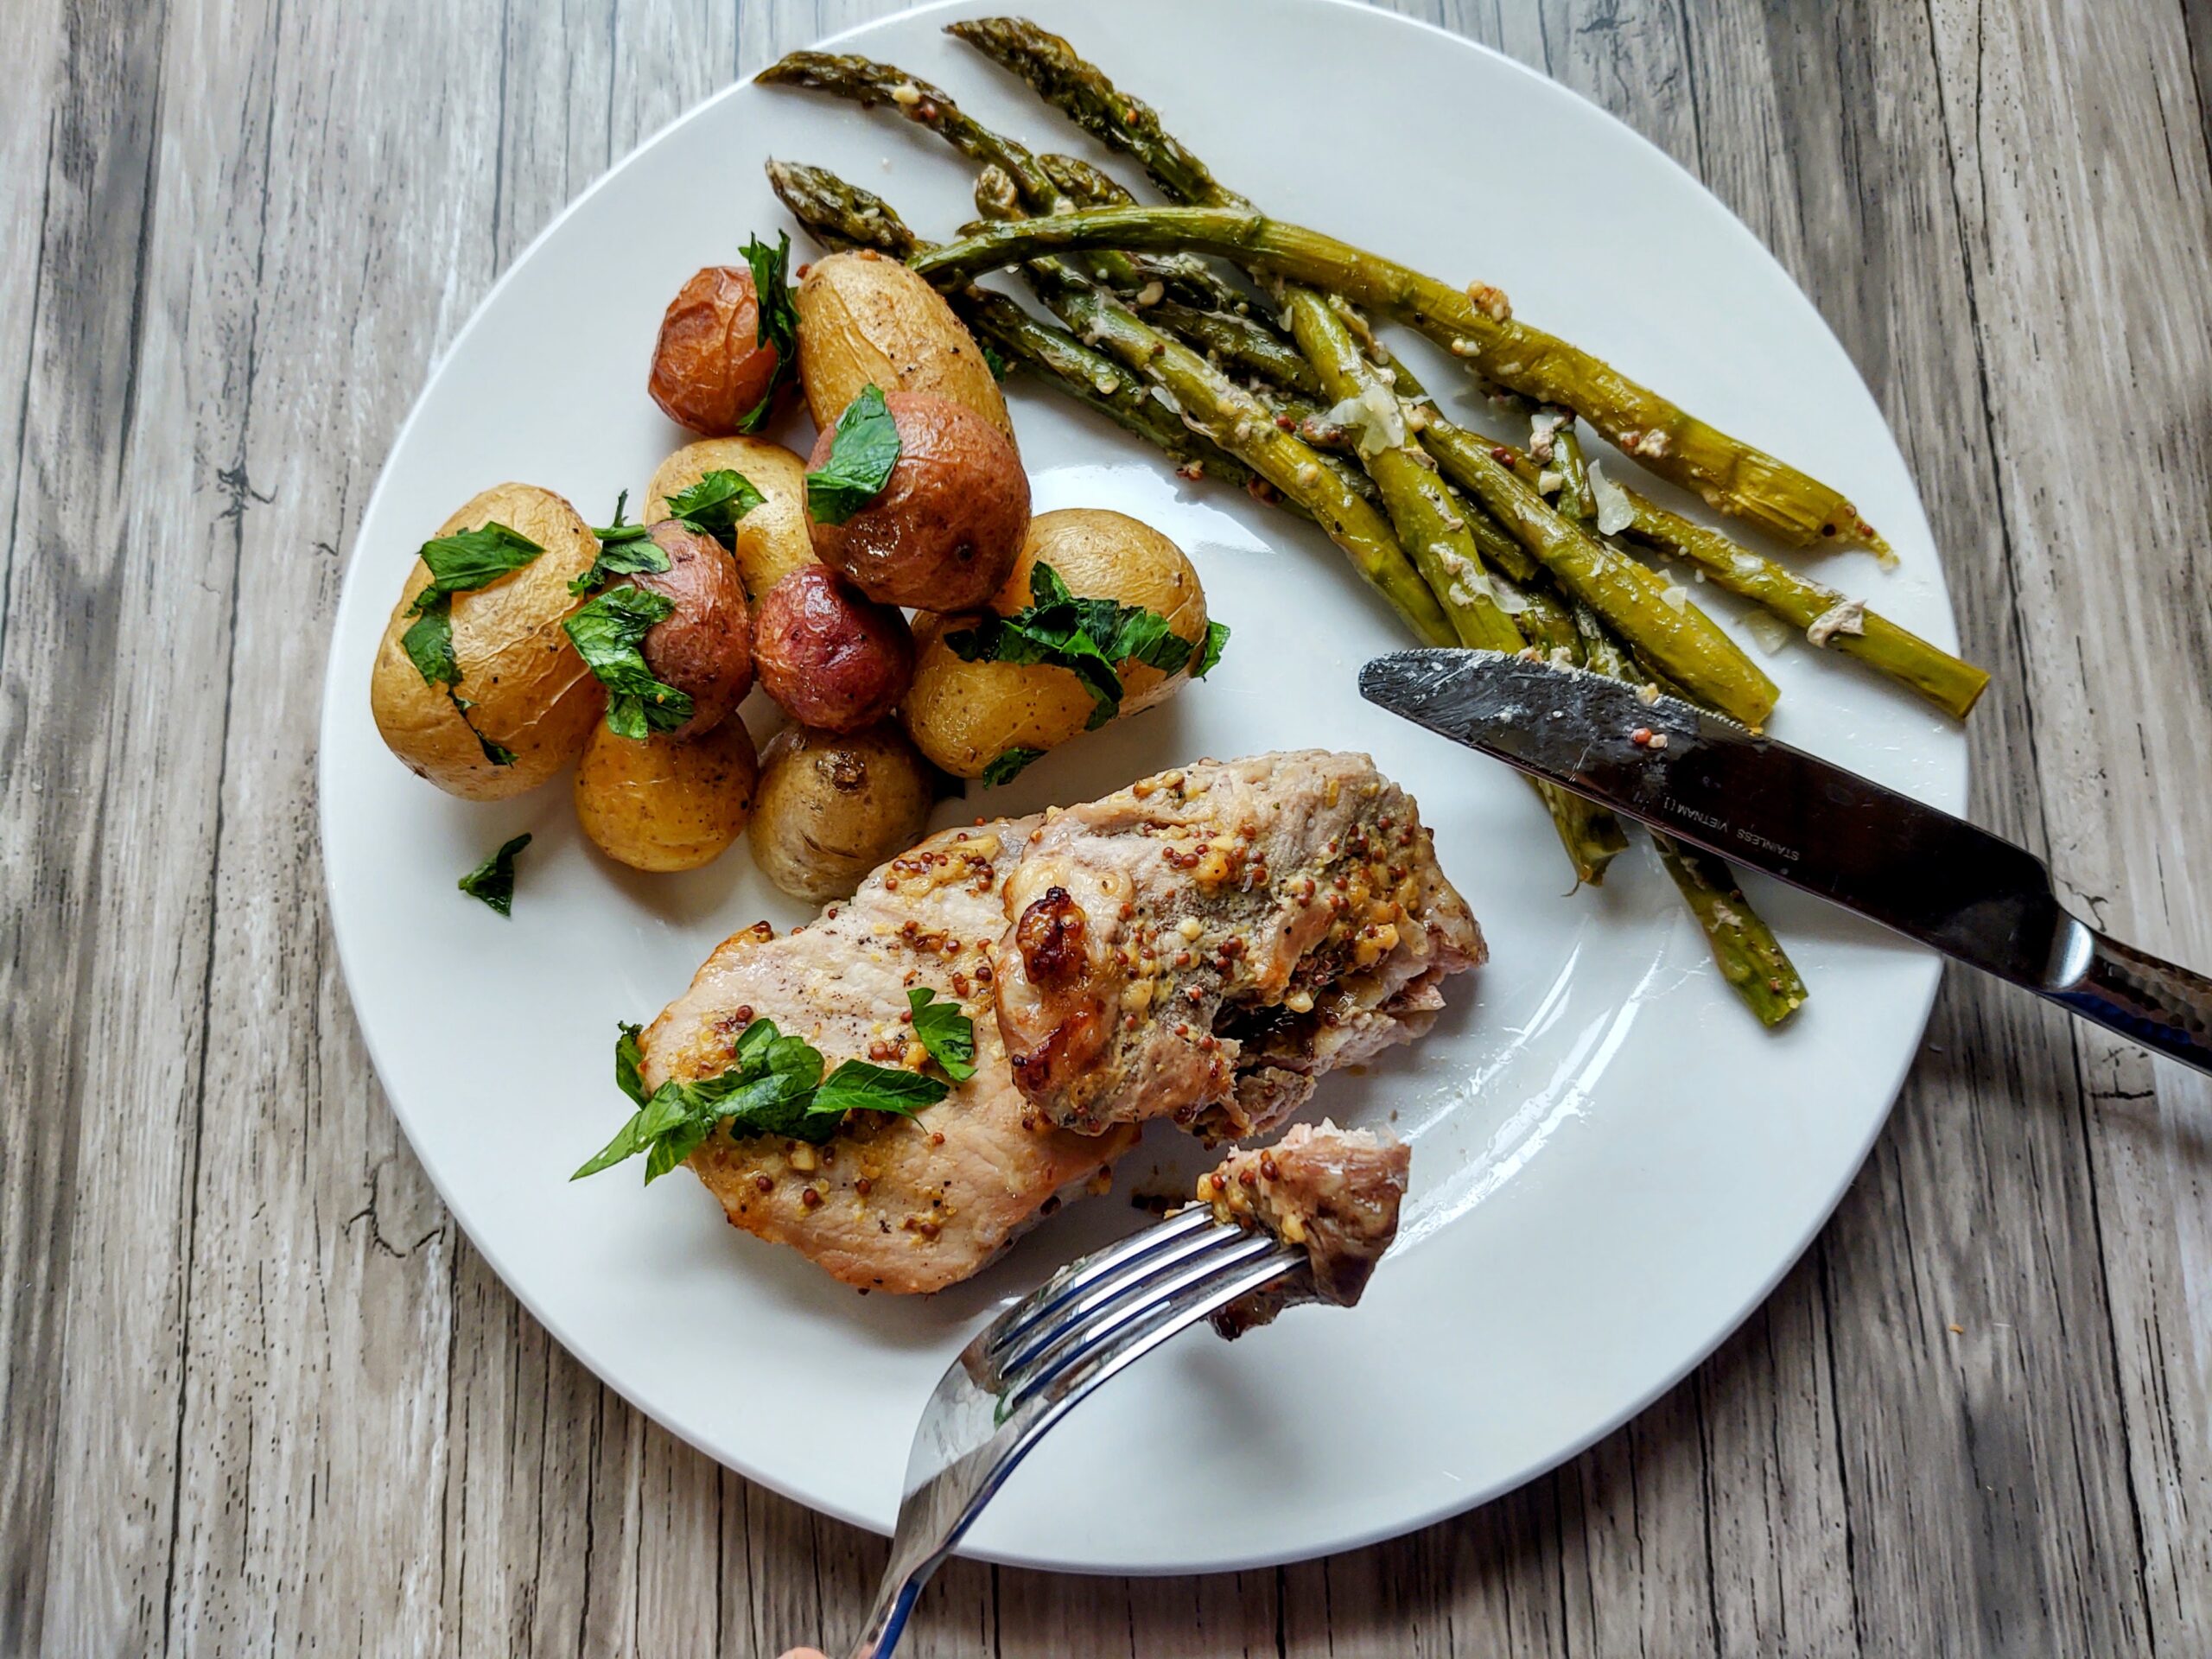 cooked boneless pork chop, dutch oven potatoes and roasted asparagus on a white plate